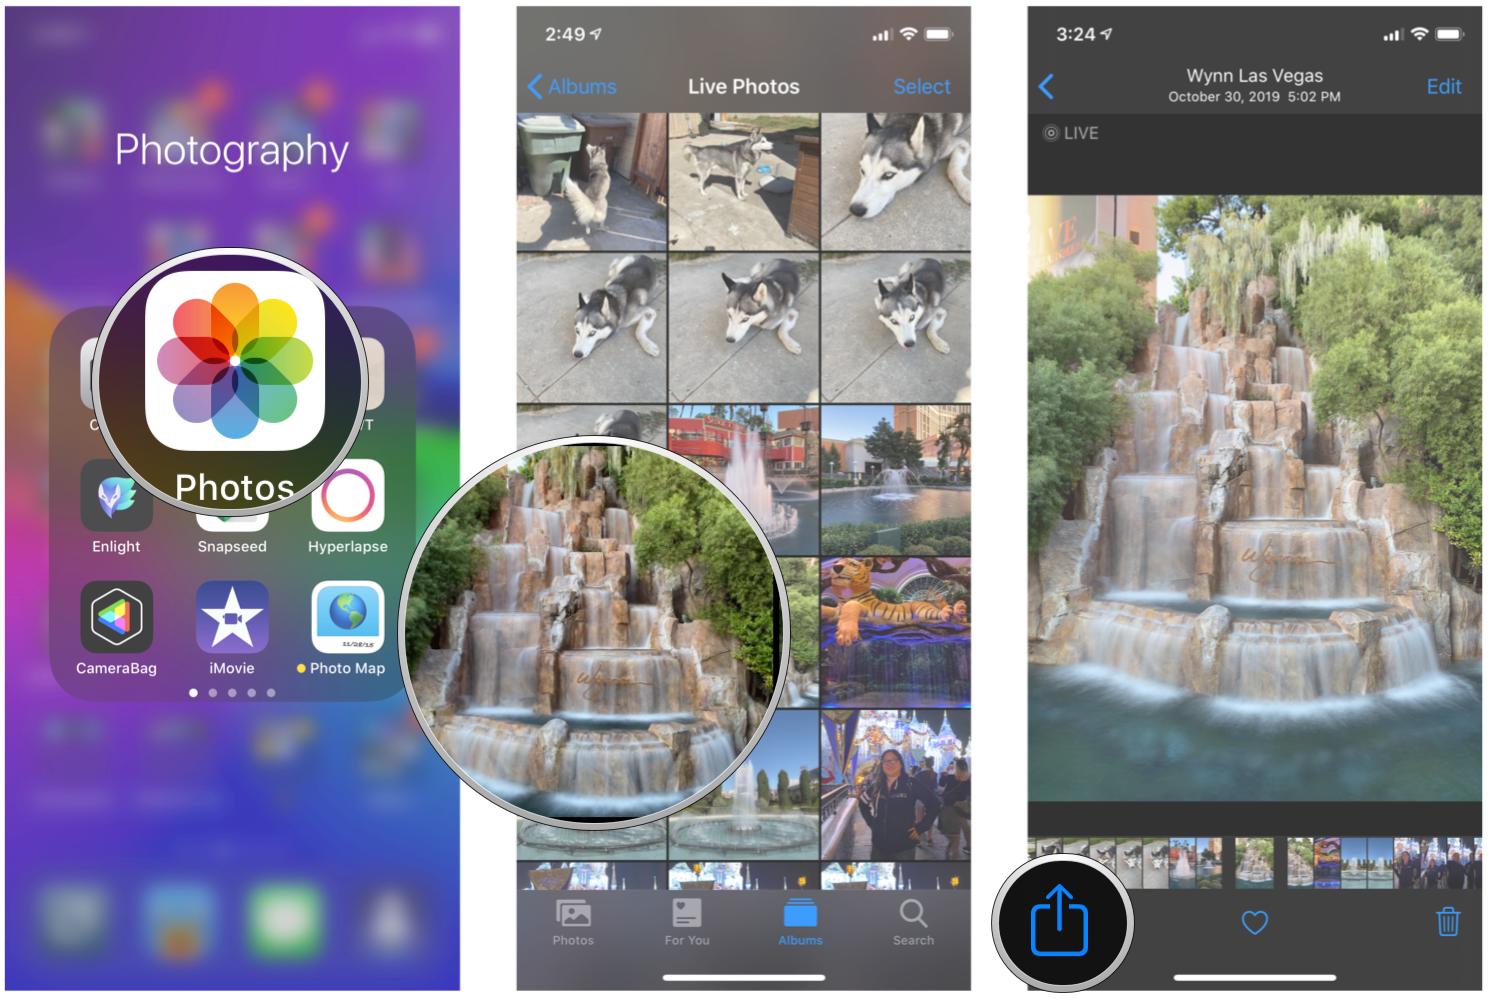 How to set a Live Photo as wallpaper on iPhone and iPad by showing steps: Launch Photos, find your Live Photo, tap Share